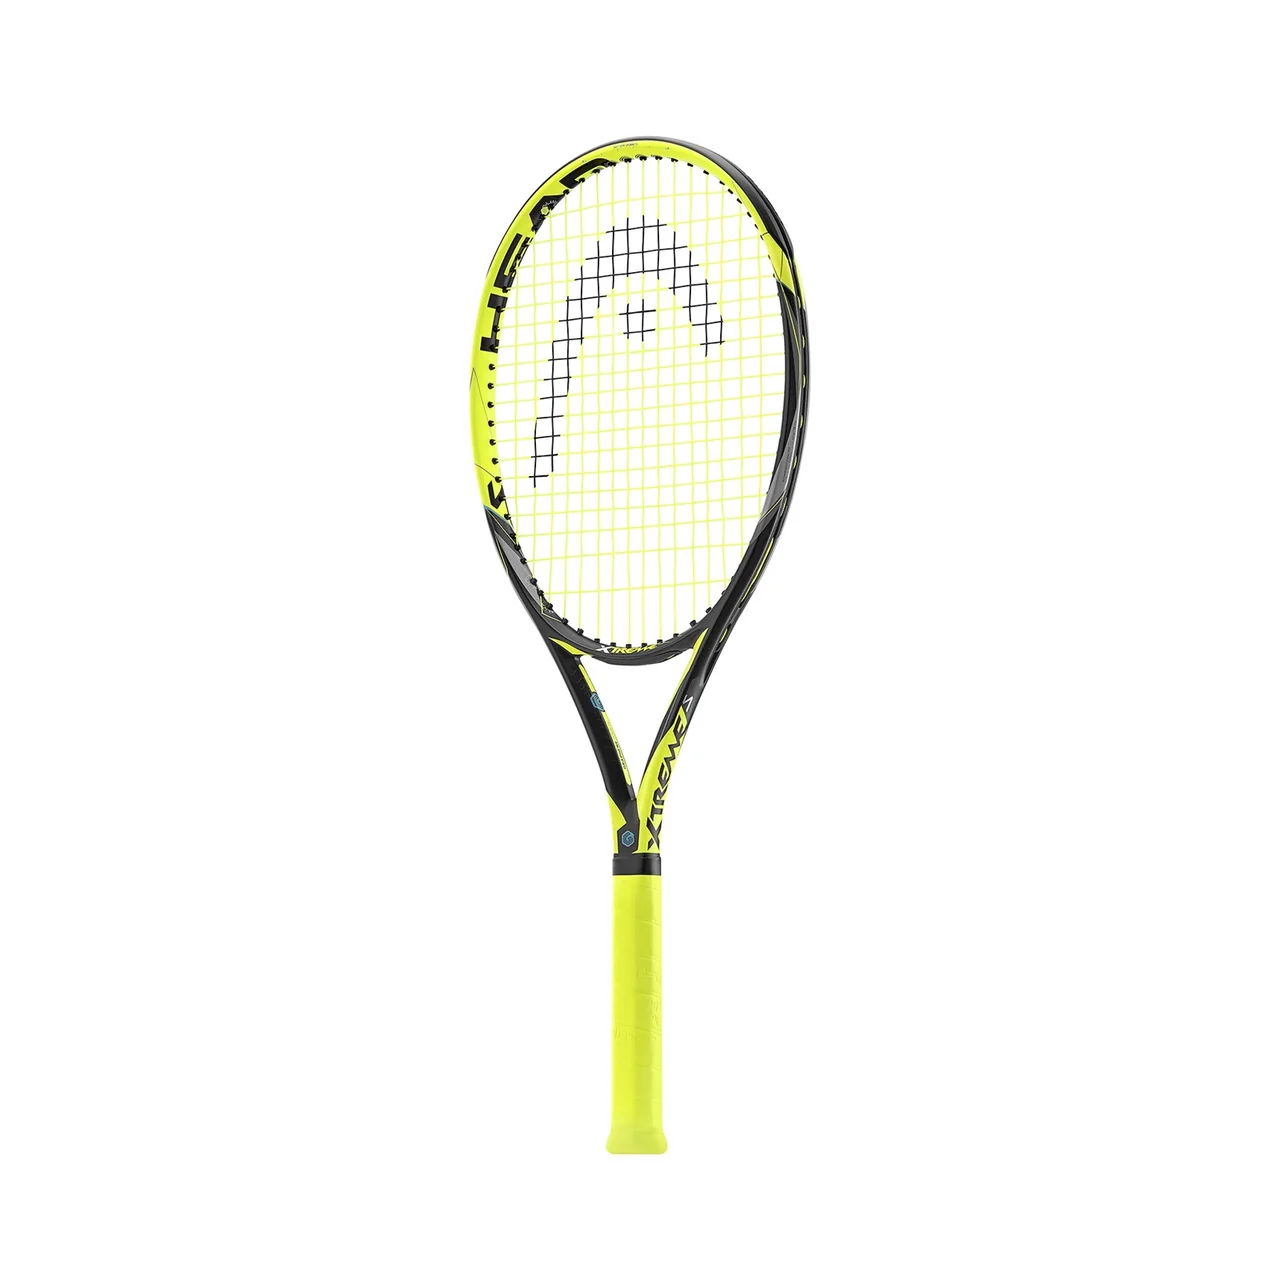 Head Graphene Touch Extreme S